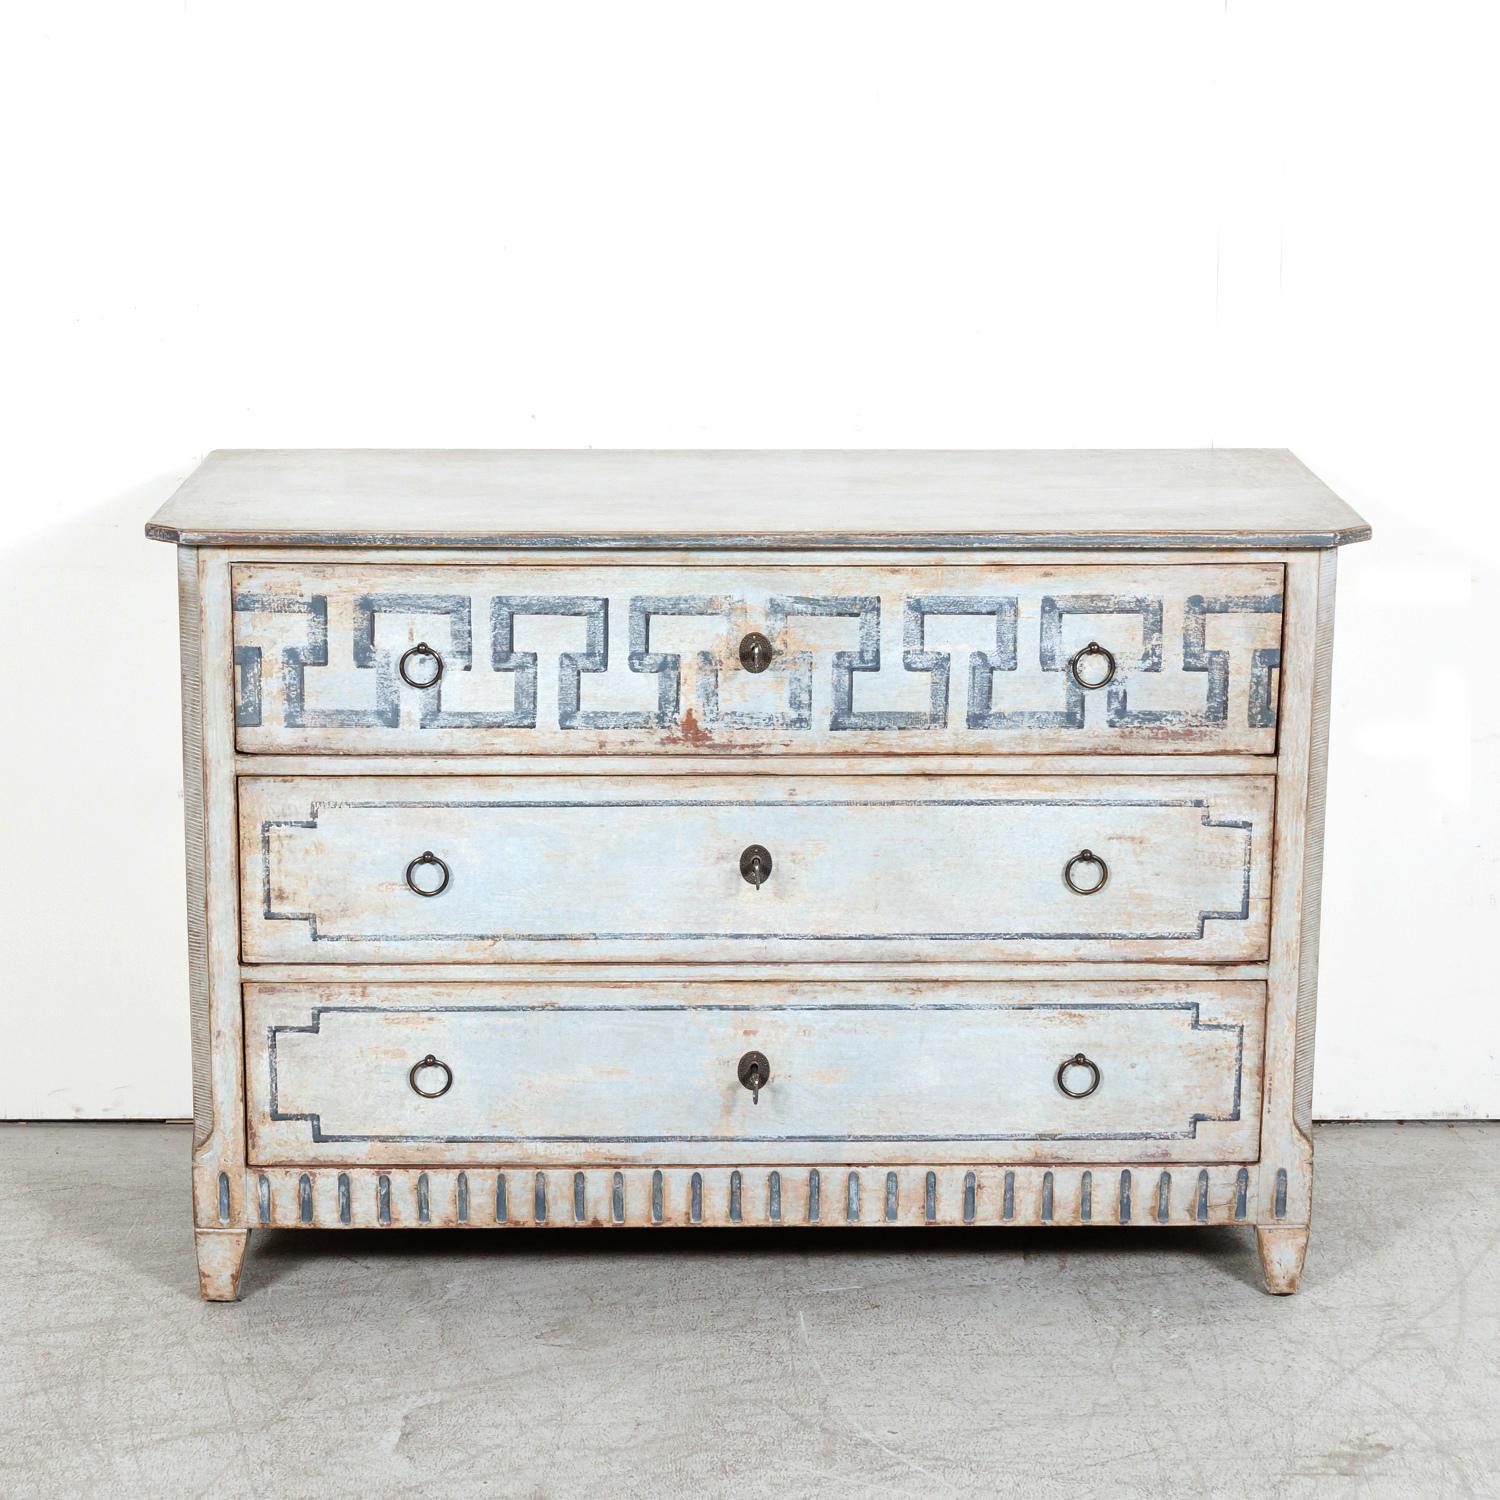 Hand-Painted 19th Century French Louis XVI Style Painted Three-Drawer Neoclassical Commode